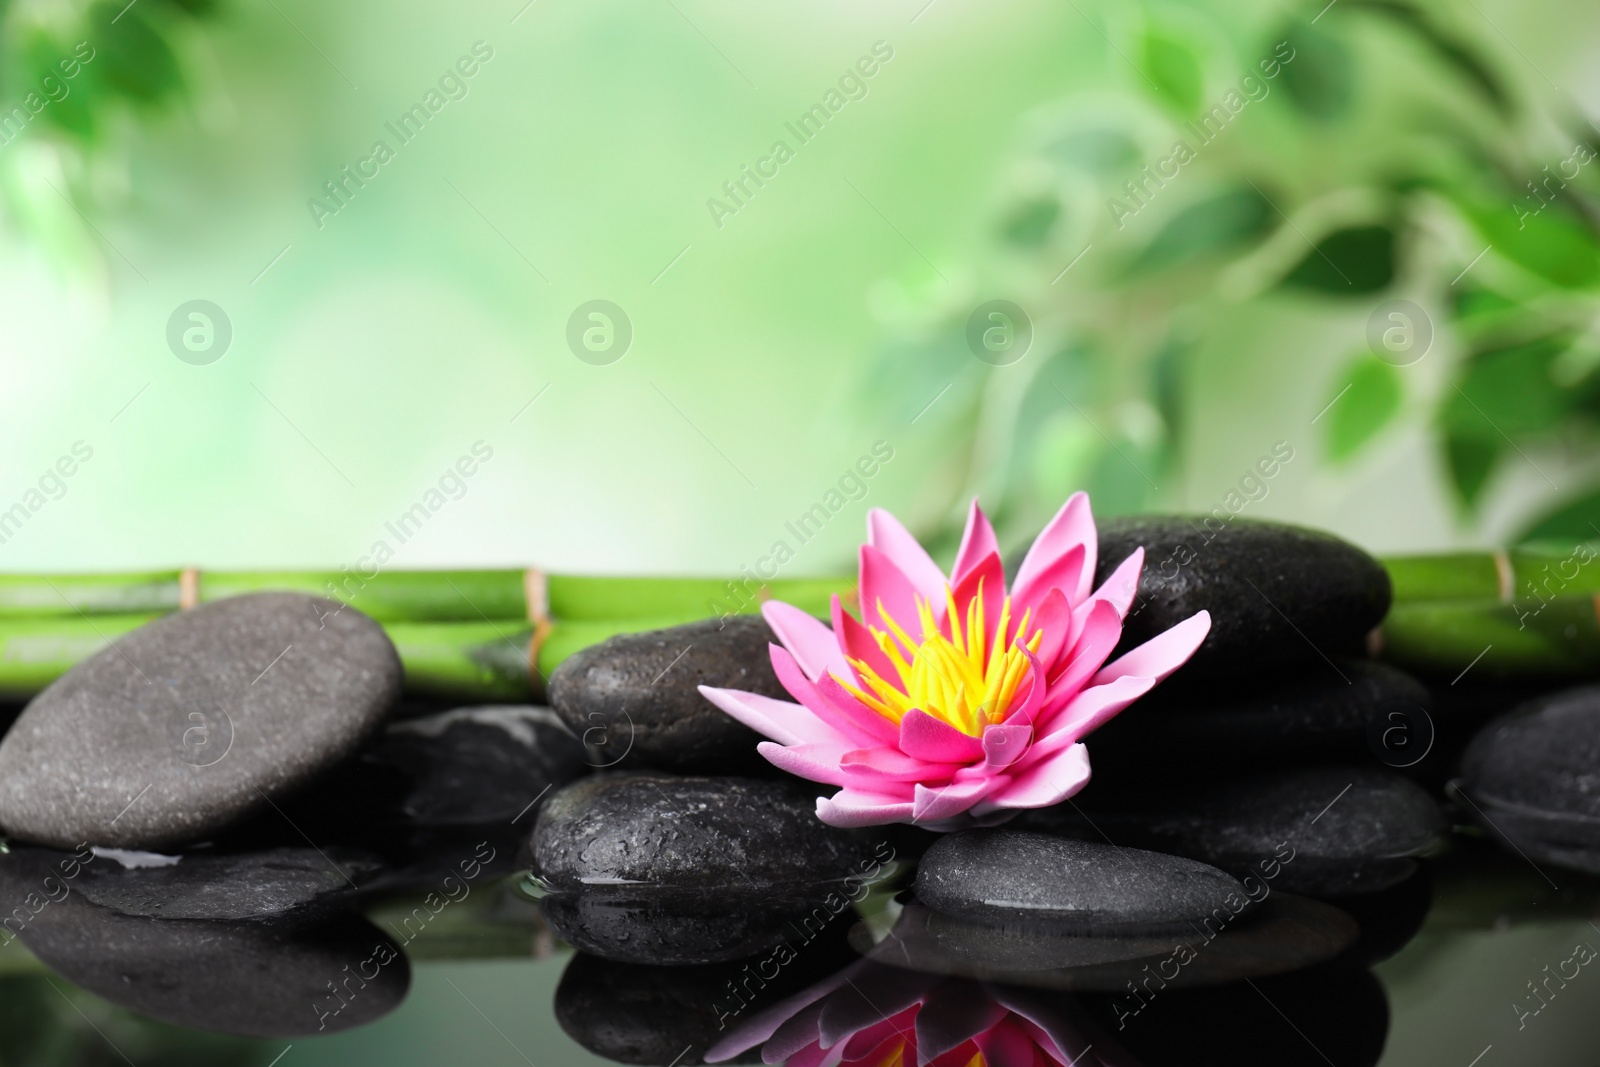 Photo of Beautiful zen garden with lotus flower and pond on blurred green background